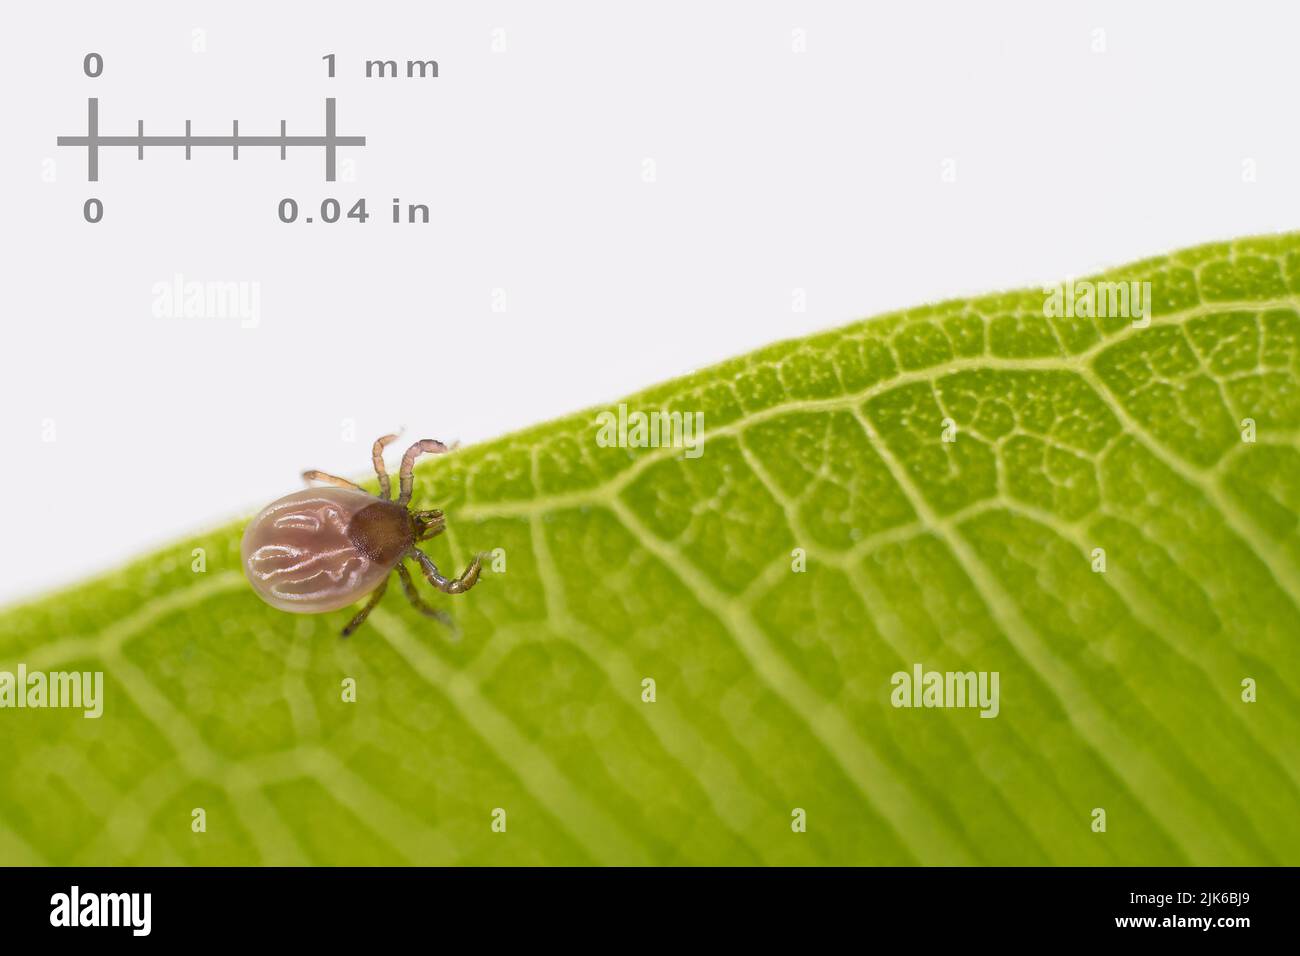 Small deer tick on green leaf and measuring scale on a white background. Ixodes ricinus. Closeup a parasitic mite fattened with blood. Insect parasite. Stock Photo